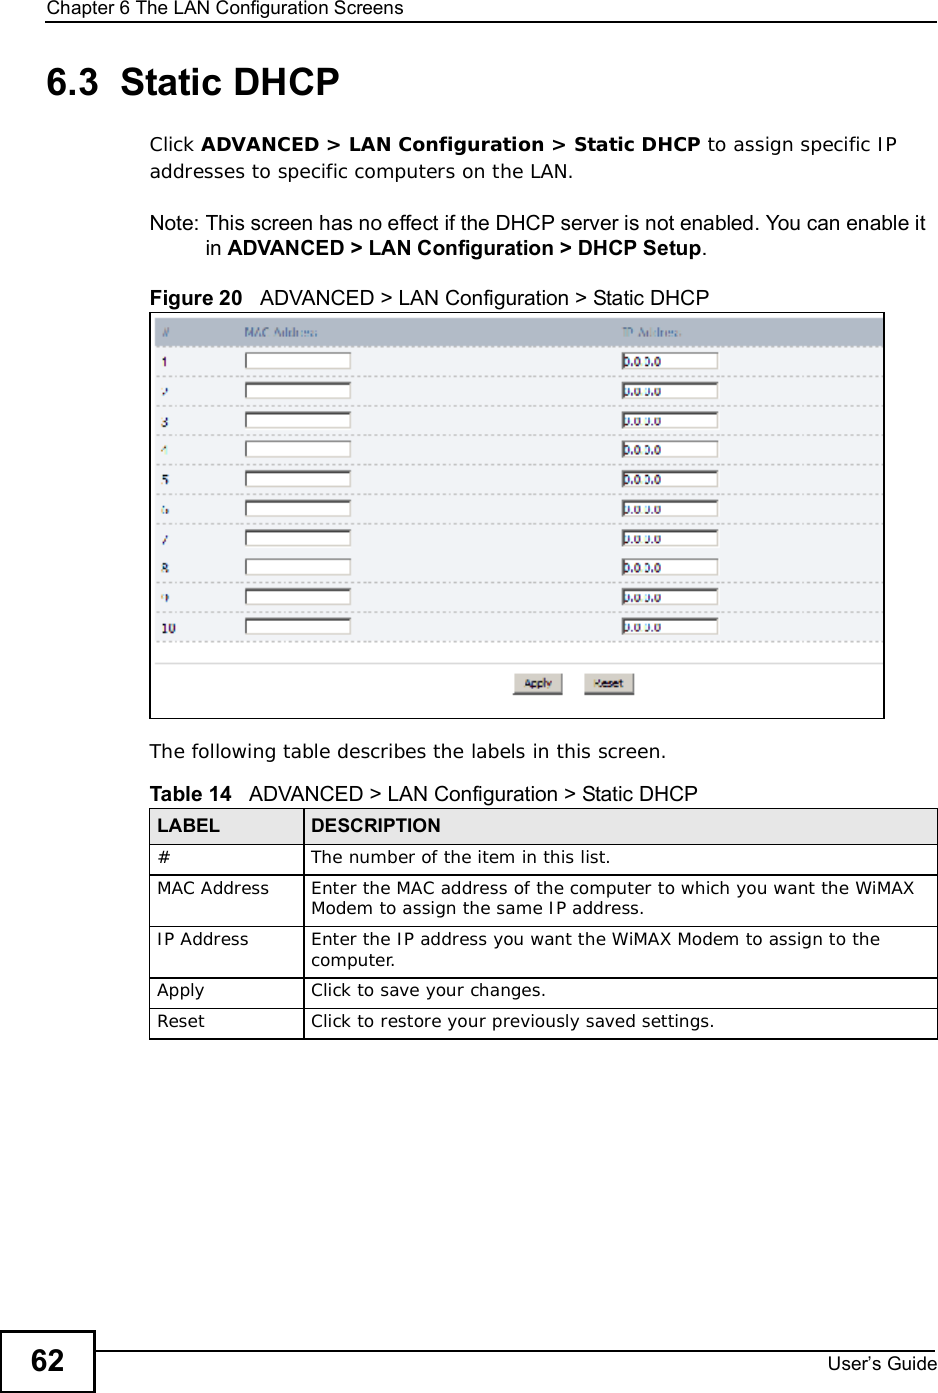 Chapter 6The LAN Configuration ScreensUser s Guide626.3  Static DHCPClick ADVANCED &gt; LAN Configuration &gt; Static DHCP to assign specific IP addresses to specific computers on the LAN.Note: This screen has no effect if the DHCP server is not enabled. You can enable it in ADVANCED &gt; LAN Configuration &gt; DHCP Setup.Figure 20   ADVANCED &gt; LAN Configuration &gt; Static DHCPThe following table describes the labels in this screen. Table 14   ADVANCED &gt; LAN Configuration &gt; Static DHCPLABEL DESCRIPTION#The number of the item in this list.MAC Address Enter the MAC address of the computer to which you want the WiMAX Modem to assign the same IP address.IP Address Enter the IP address you want the WiMAX Modem to assign to the computer.Apply Click to save your changes.Reset Click to restore your previously saved settings.